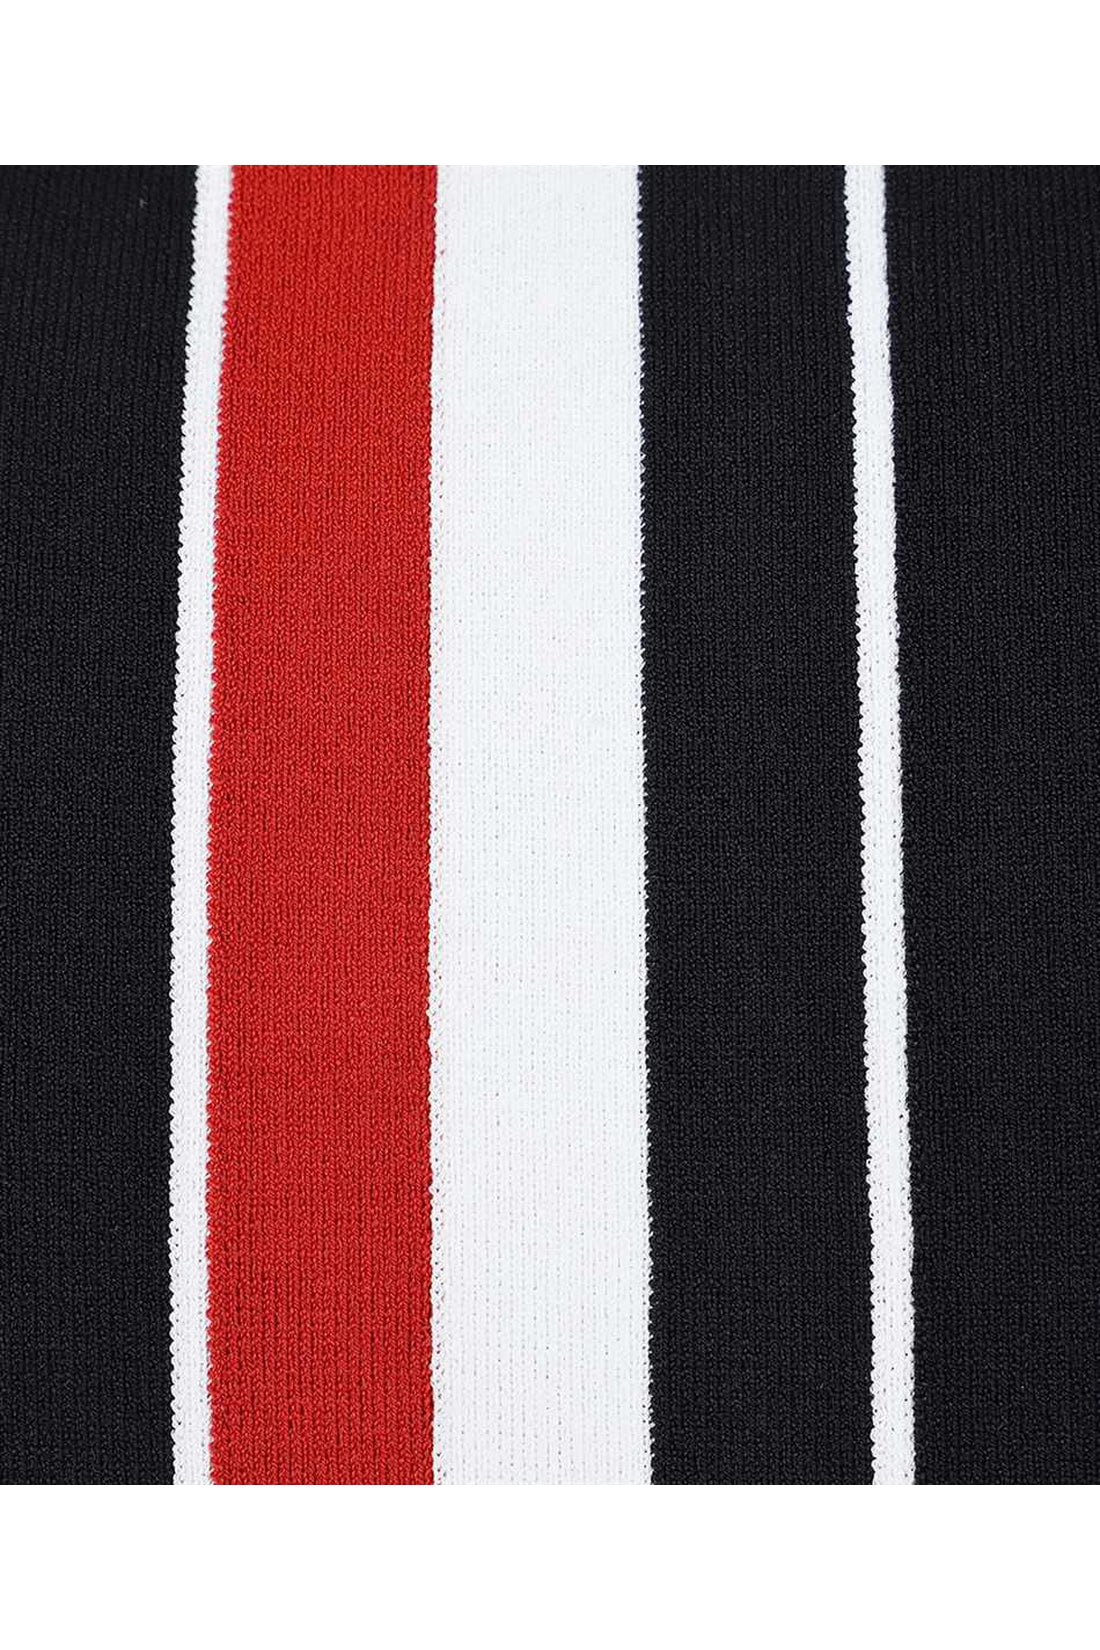 Thom Browne-OUTLET-SALE-Knitted T-shirt-ARCHIVIST